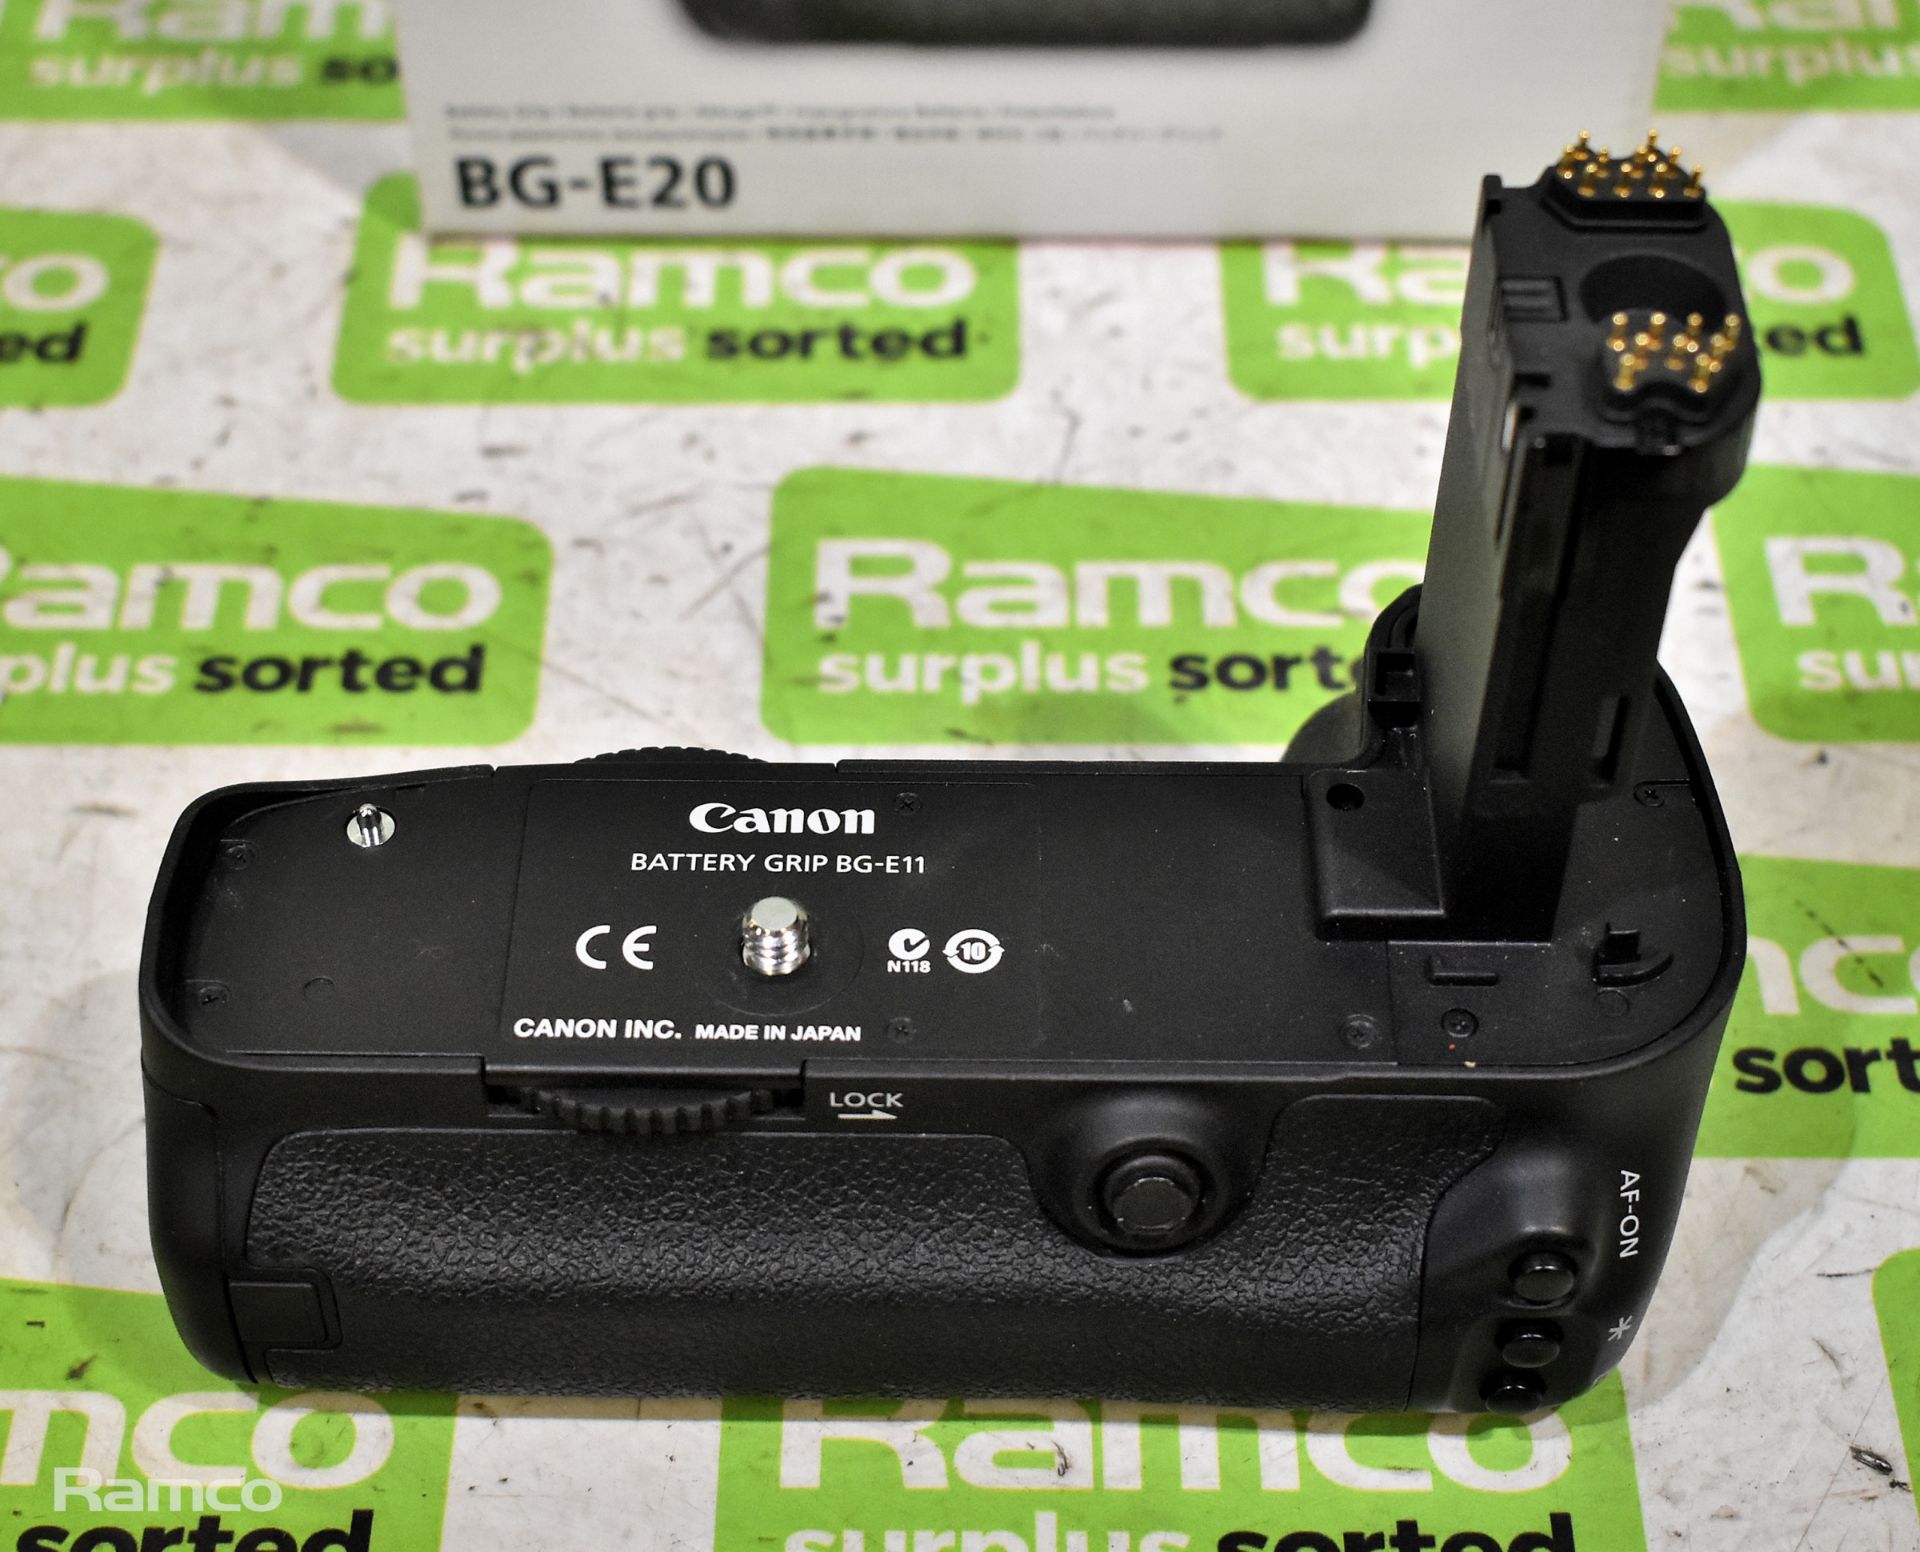 Canon BG-E20 battery grip with case - Image 2 of 4